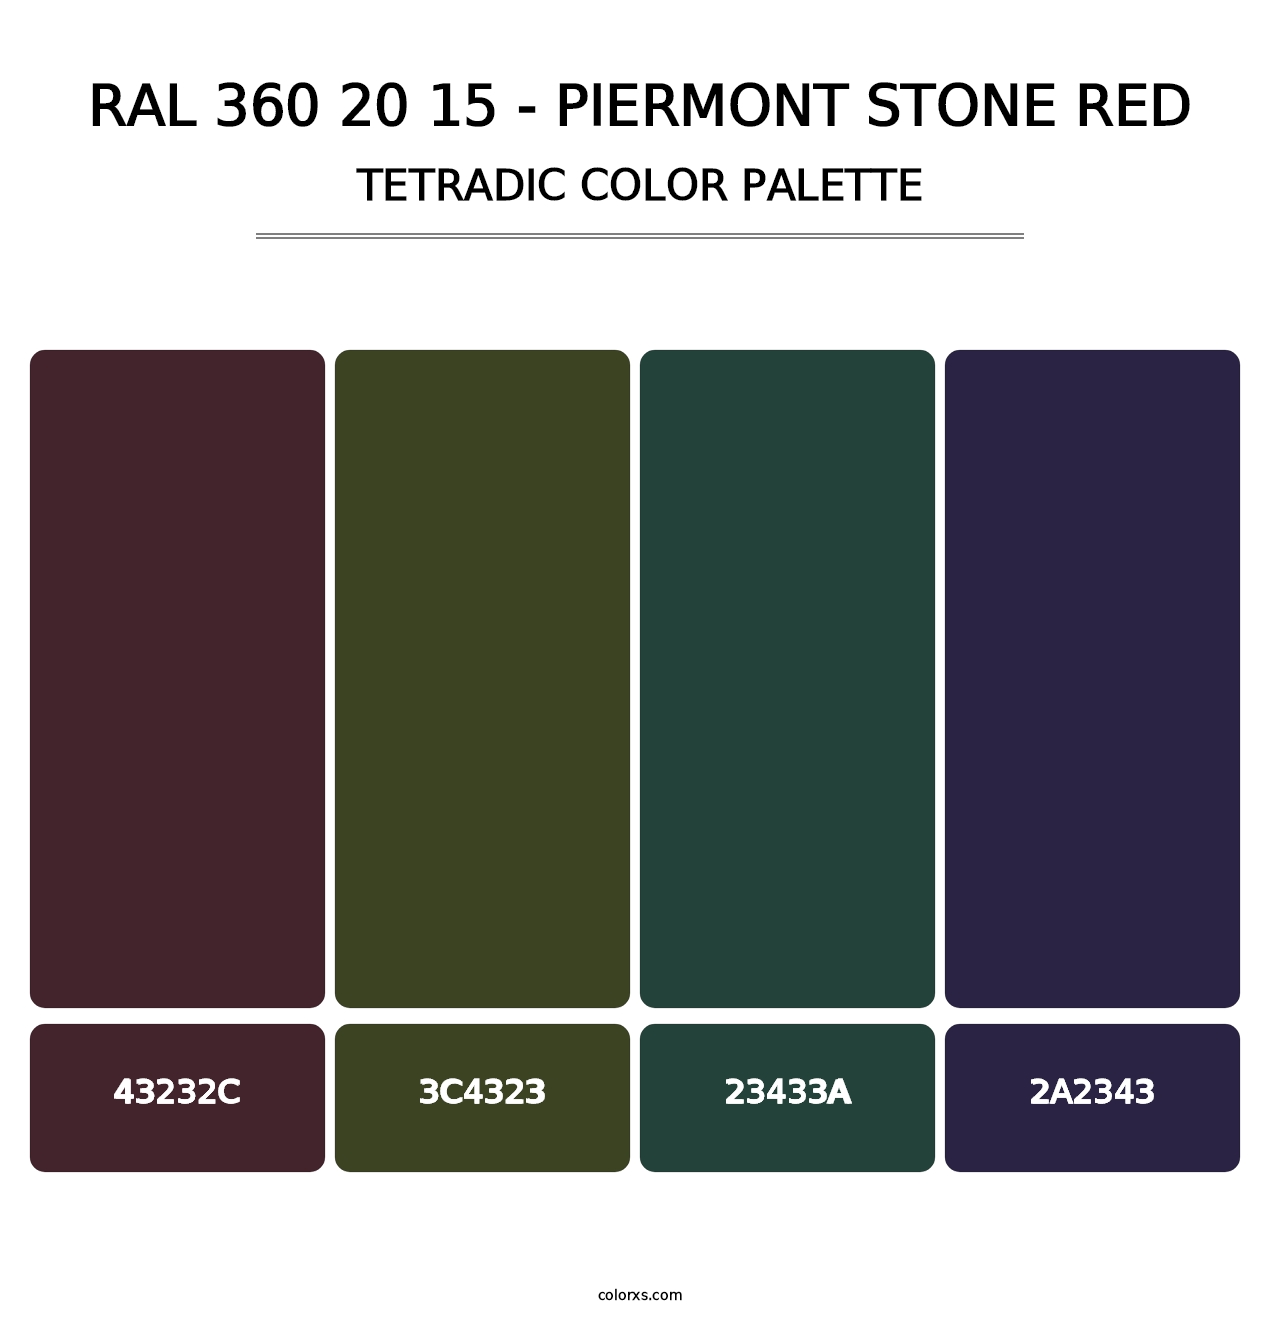 RAL 360 20 15 - Piermont Stone Red - Tetradic Color Palette